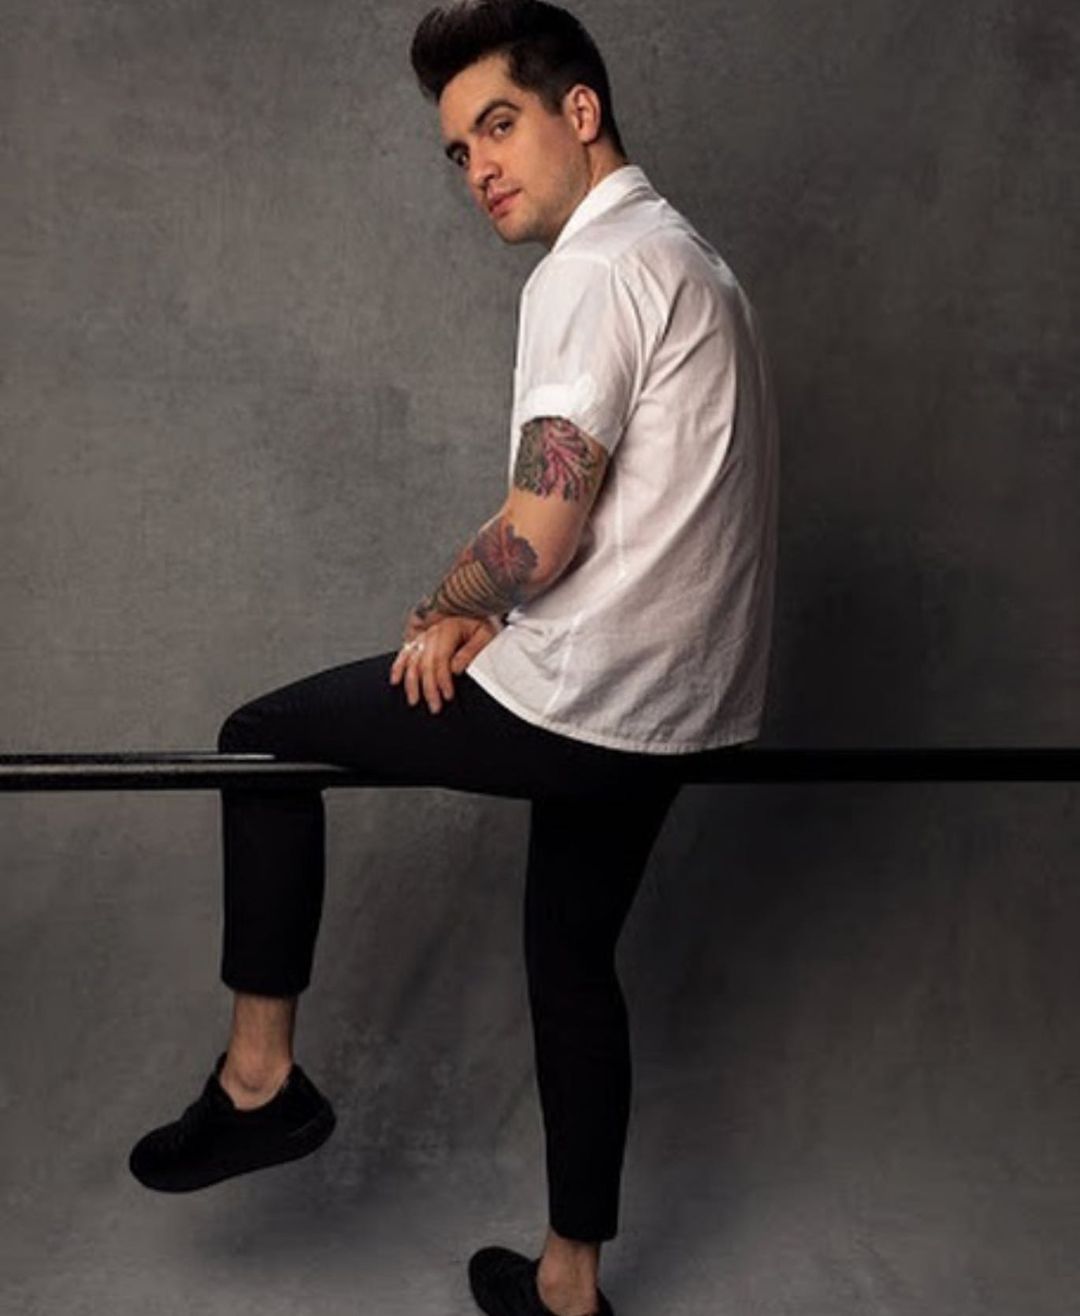 Brendon Urie - Biography, Profile, Facts, and Career